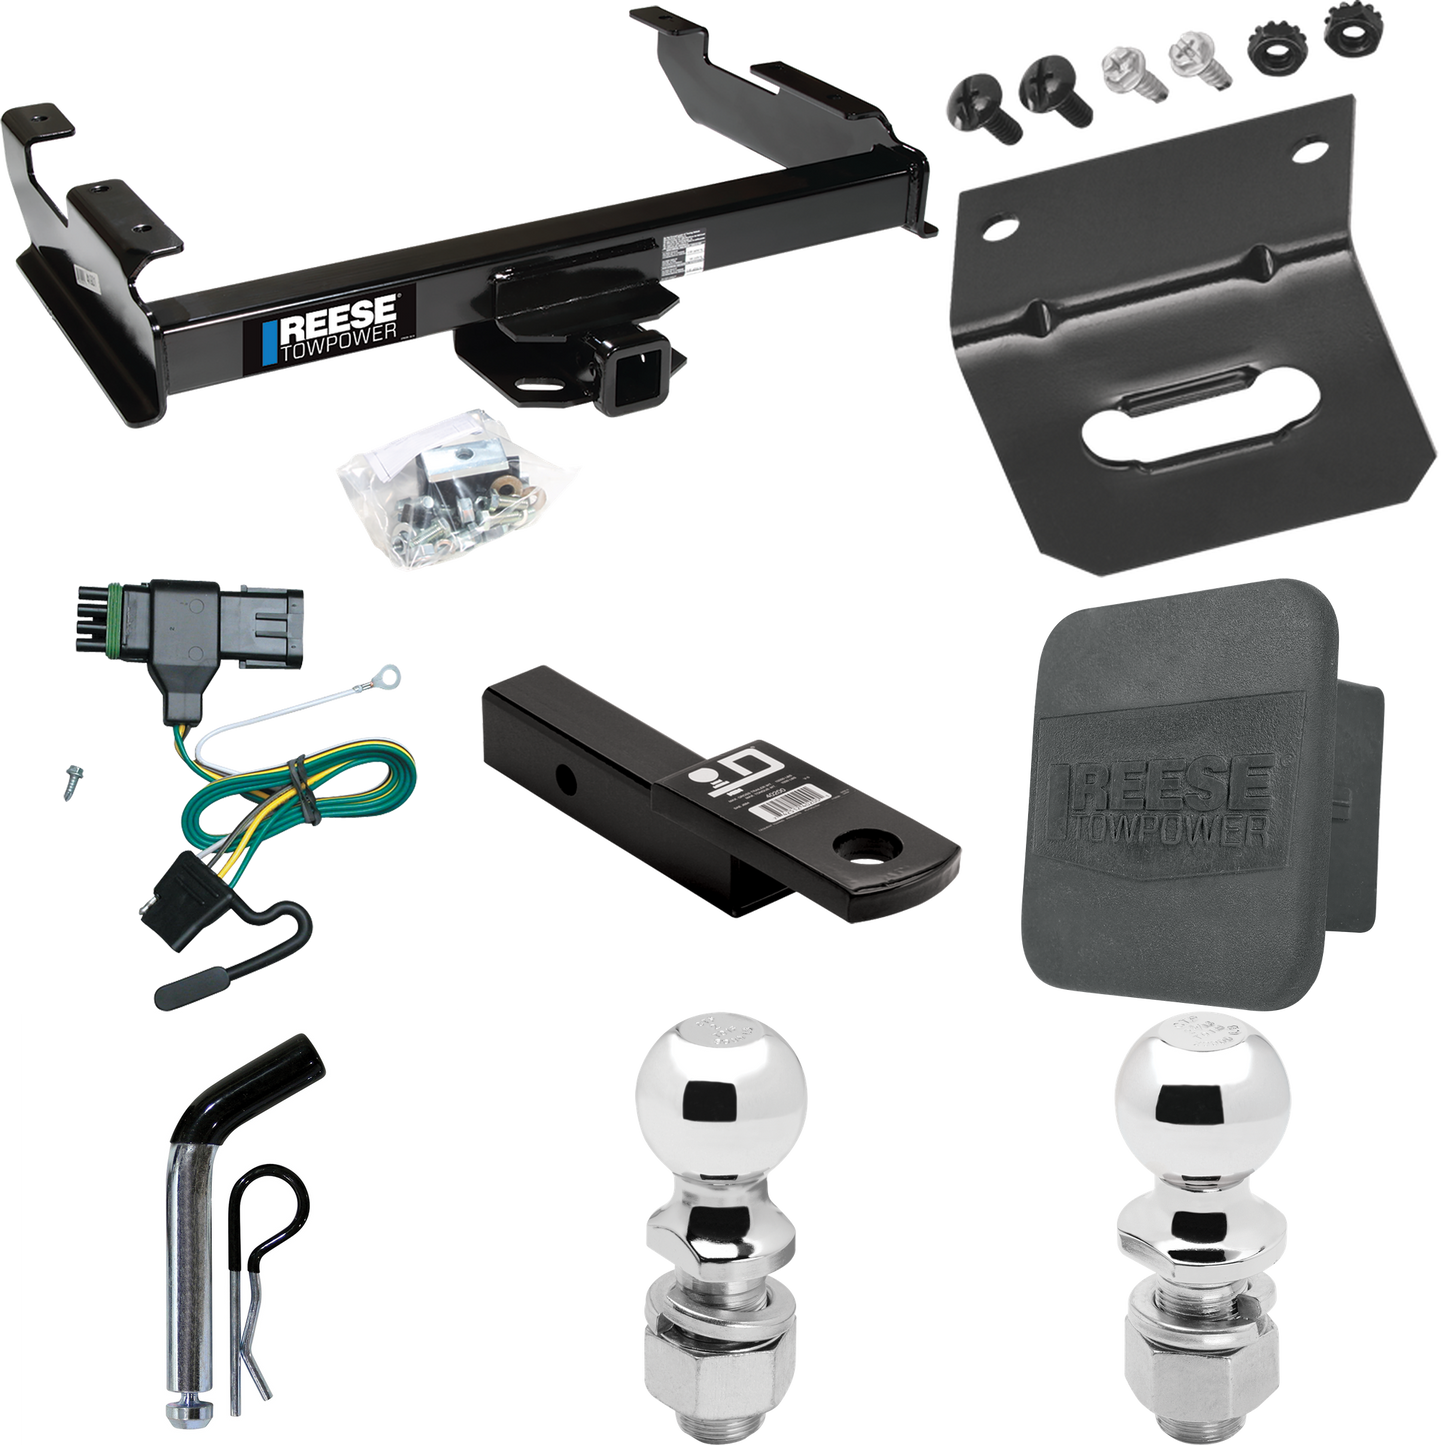 Fits 1988-1999 Chevrolet C1500 Trailer Hitch Tow PKG w/ 4-Flat Wiring Harness + Ball Mount w/ 2" Drop + Pin/Clip + 2" Ball + 2-5/16" Ball + Hitch Cover + Wiring Bracket By Reese Towpower